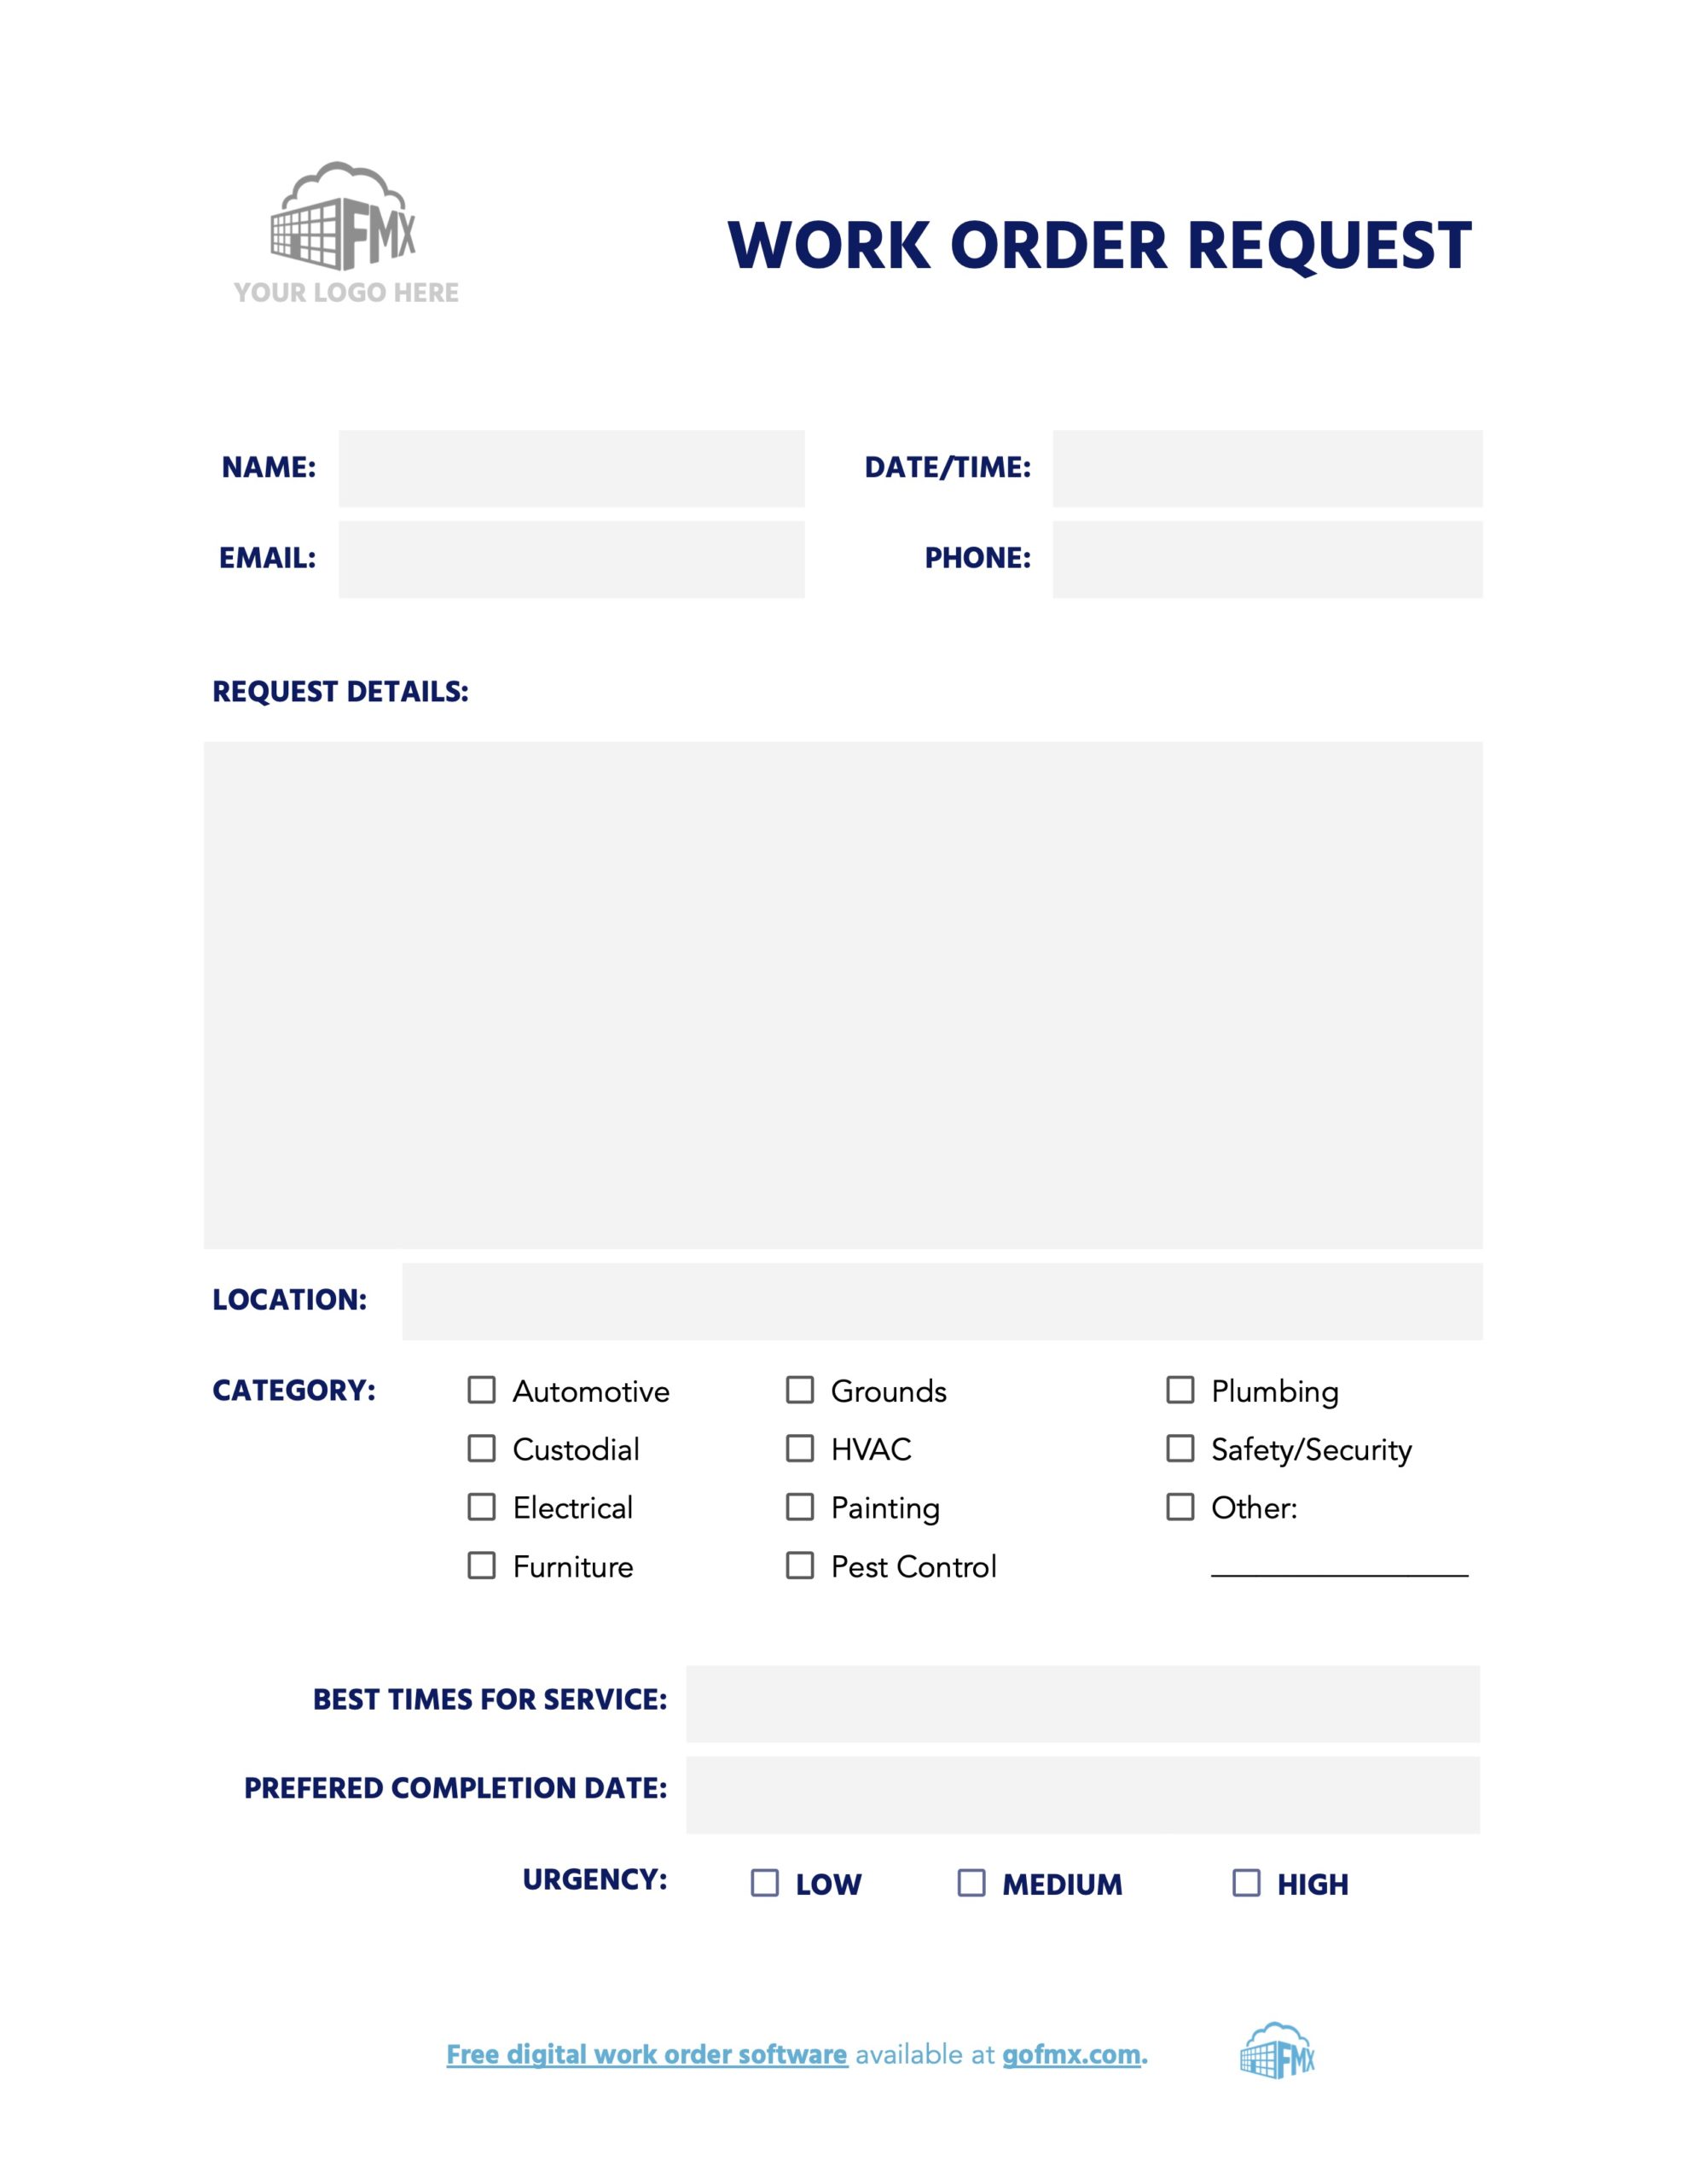 Maintenance Work Order Form [Free Downloadable Template] FMX